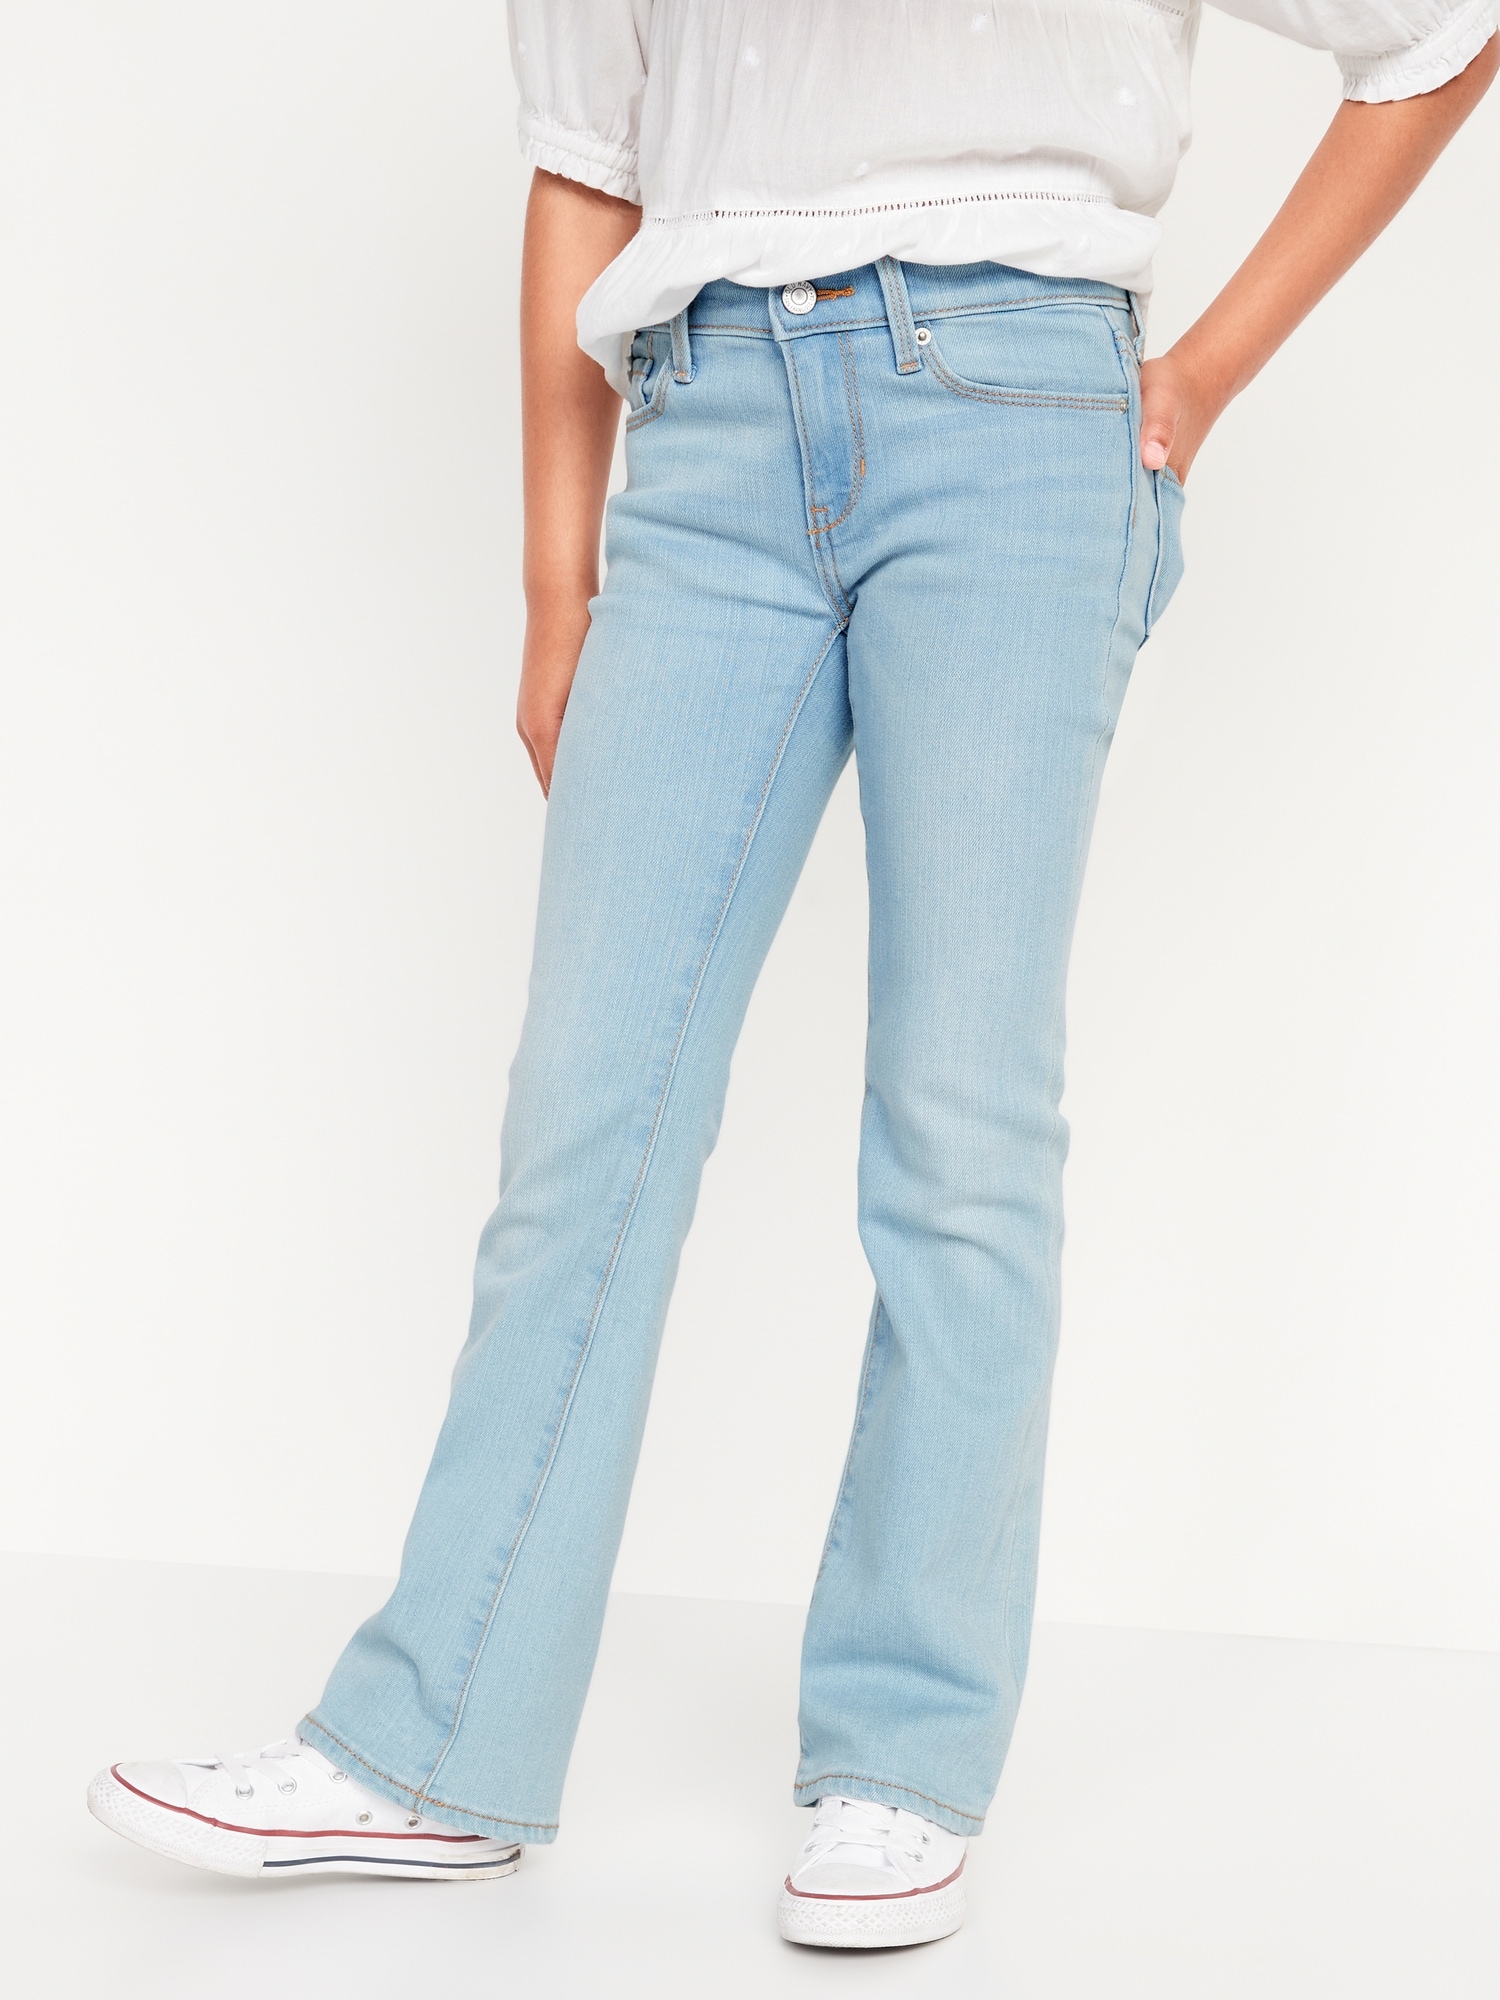 Girl's Jeans  Buy Stylish Skinny, Bootcut Jeans from Kmart